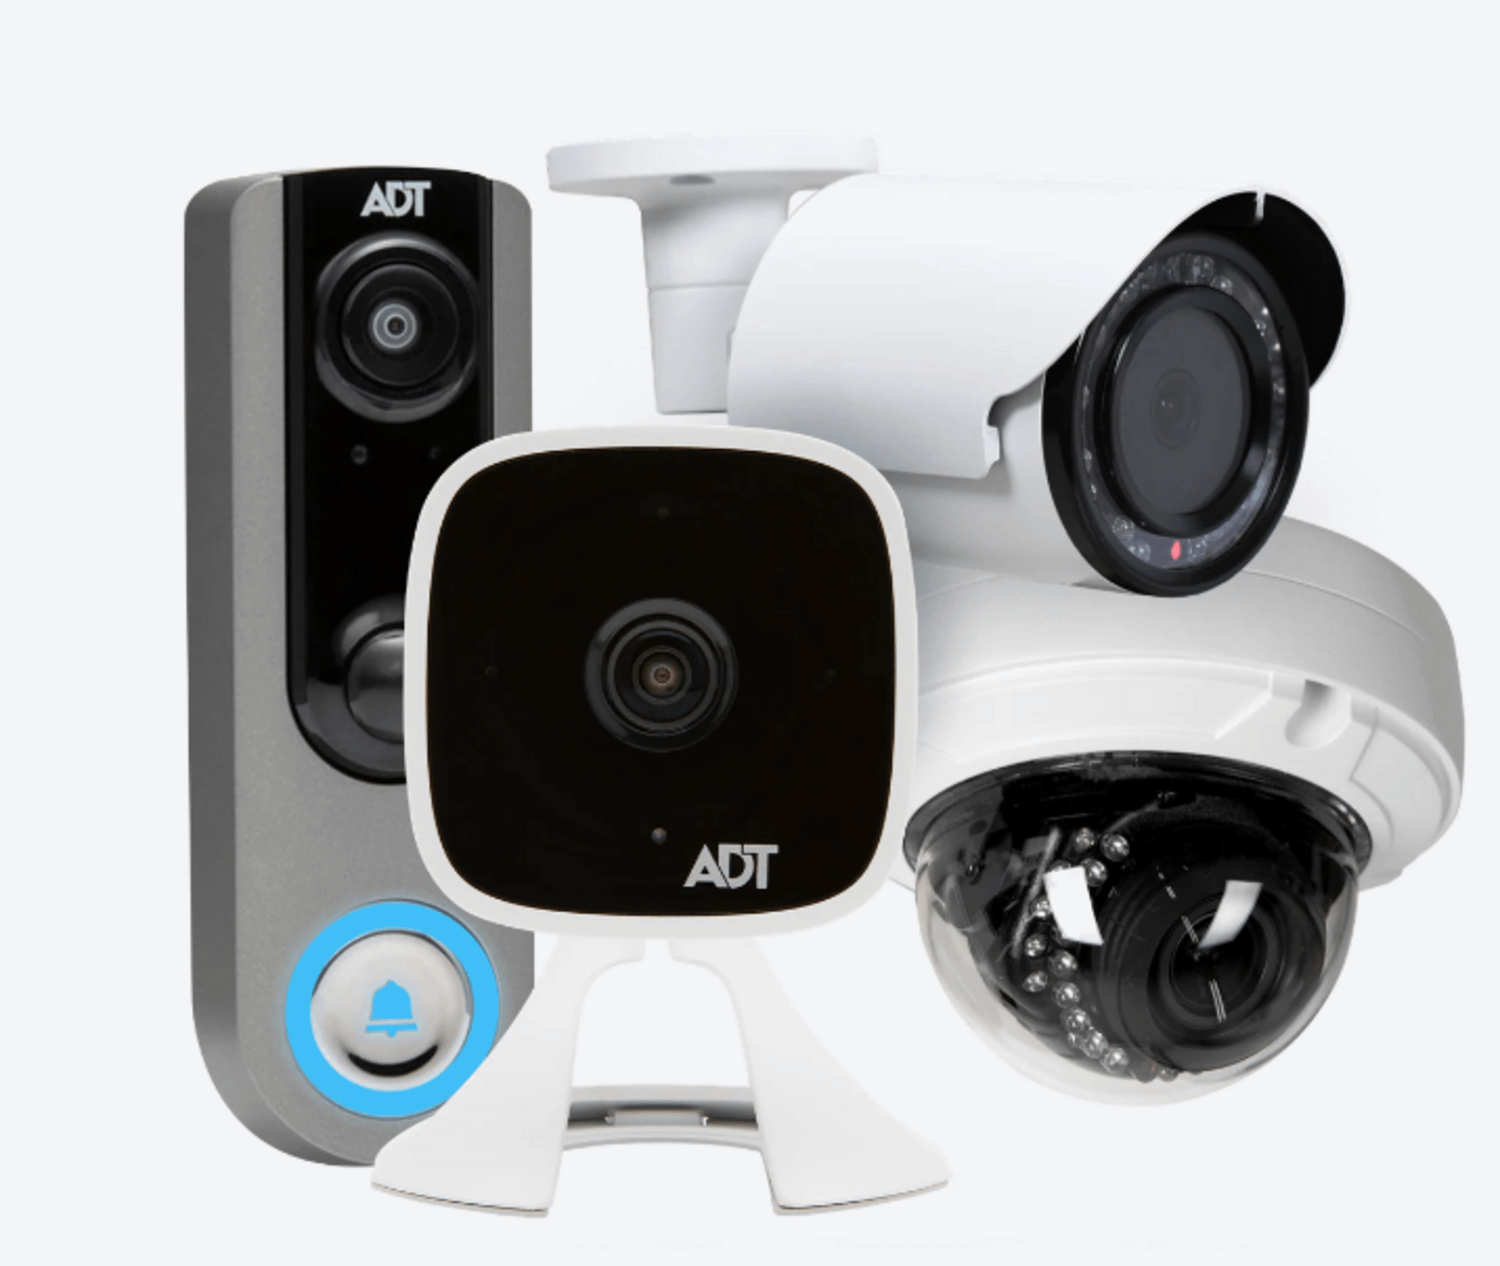 Many different security cameras